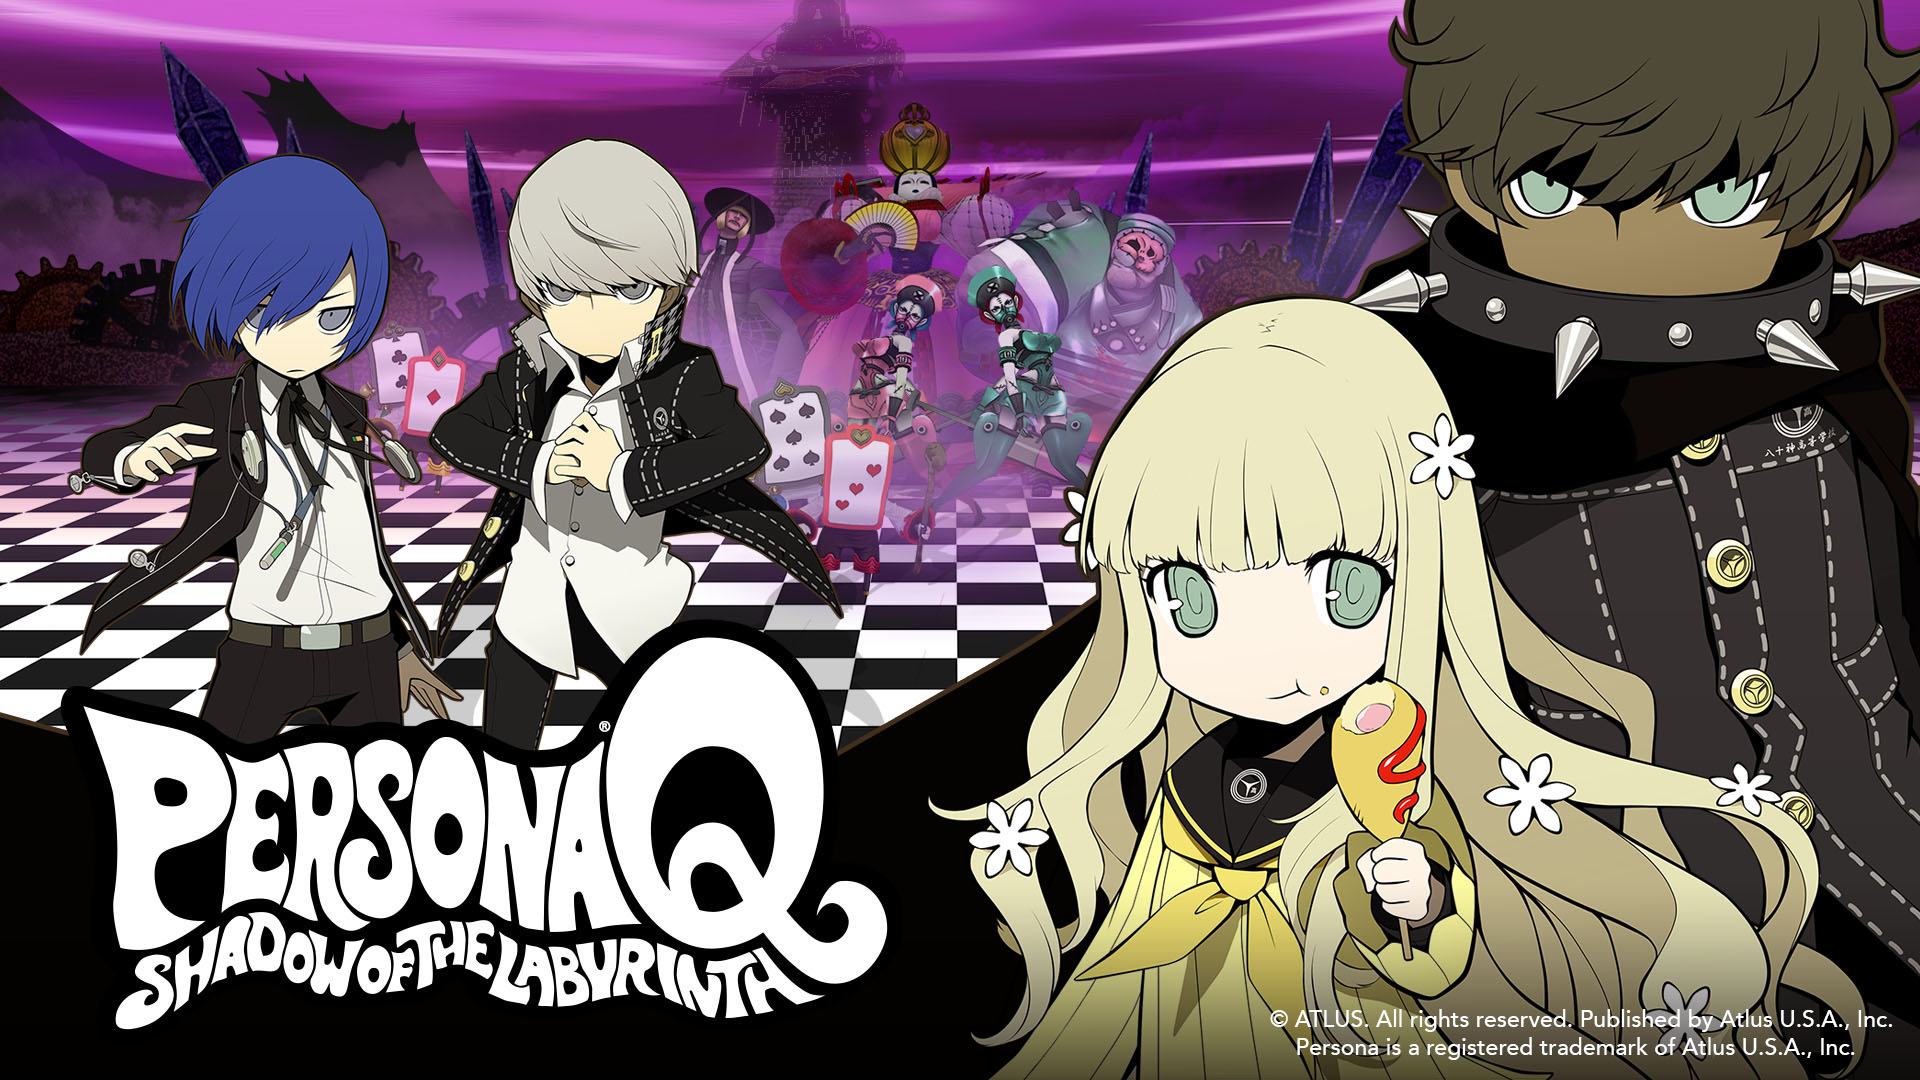 Video Game Persona Q: Shadow of the Labyrinth HD Wallpaper | Background Image